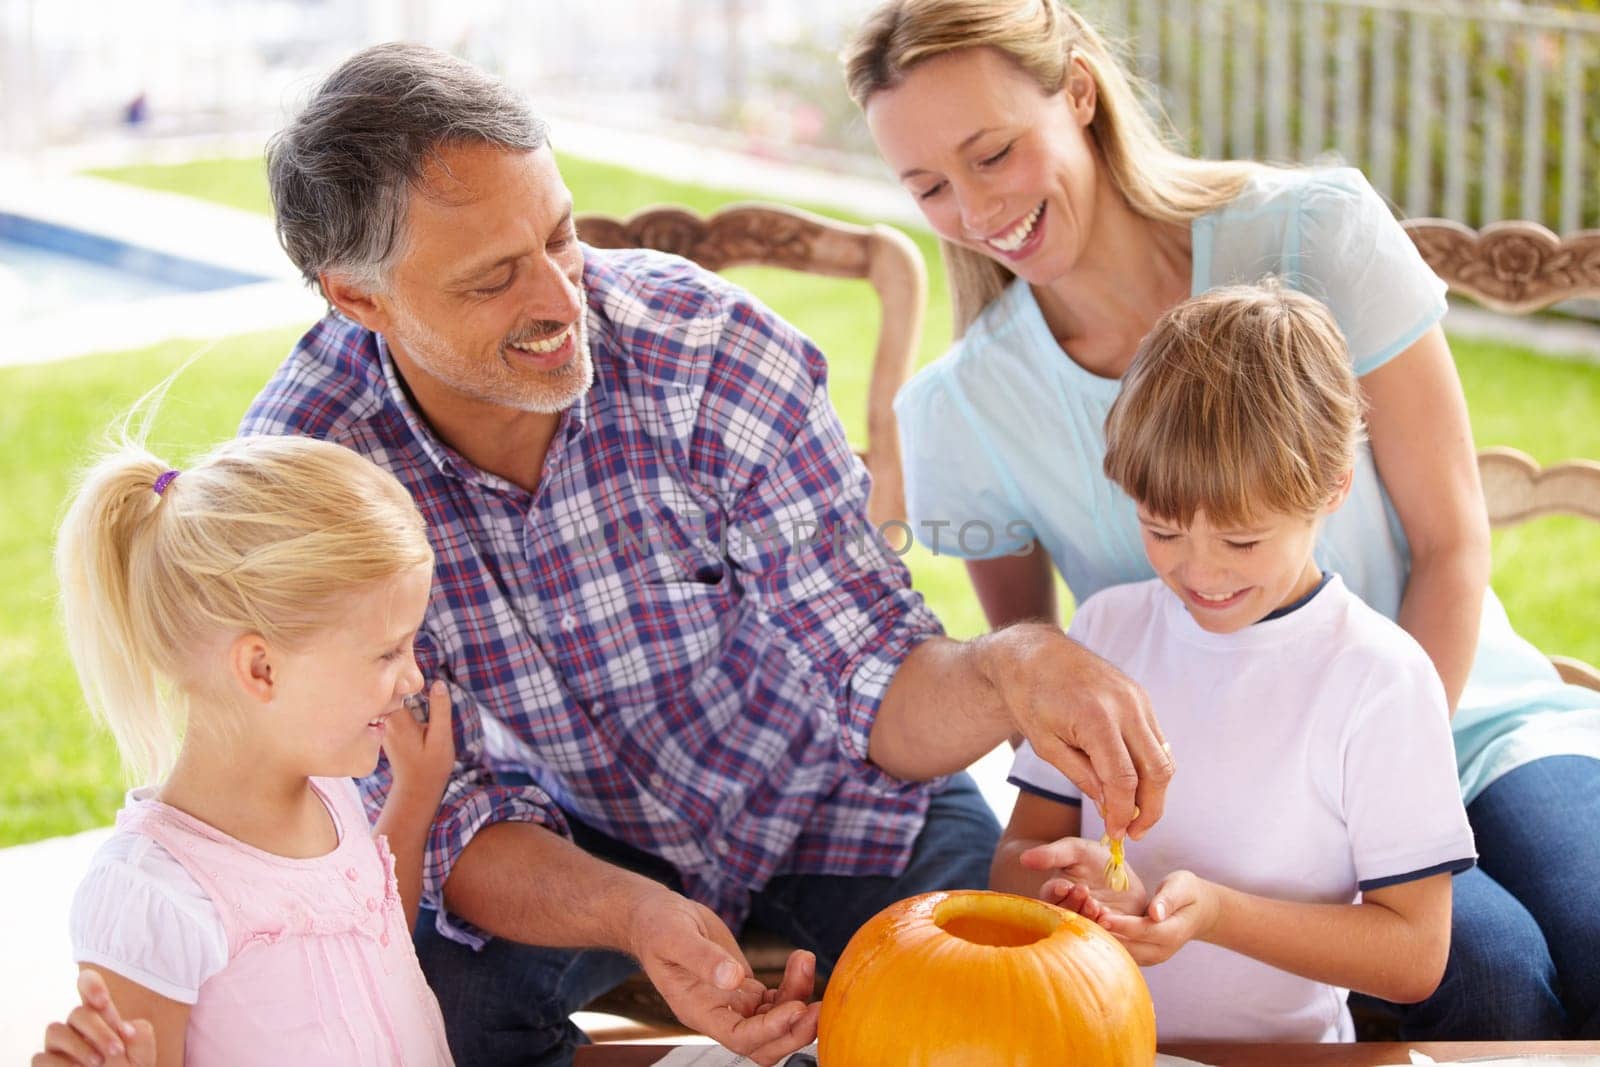 Halloween, family and carving a pumpkin with children outdoor in home backyard for fun and bonding. Man and woman or parents and young kids together for creativity, holiday lantern and happy craft.